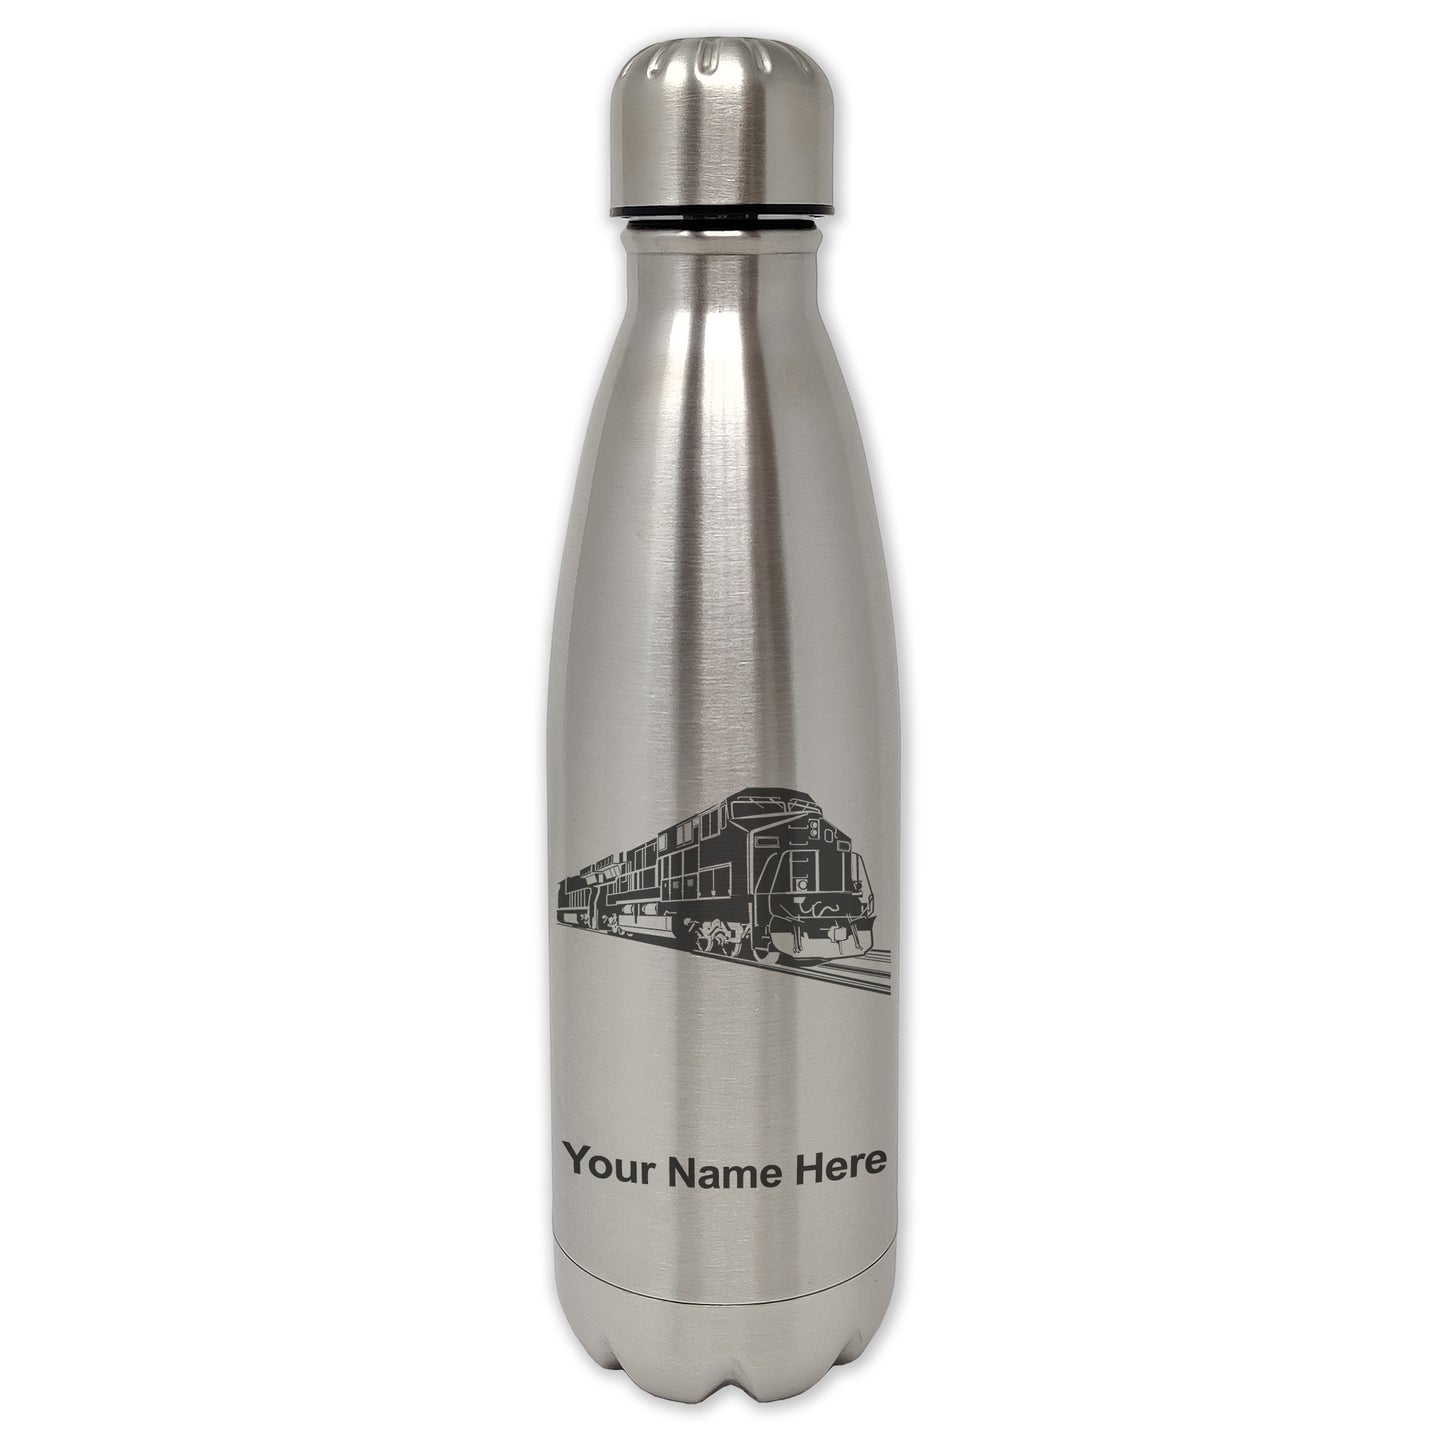 LaserGram Single Wall Water Bottle, Freight Train, Personalized Engraving Included